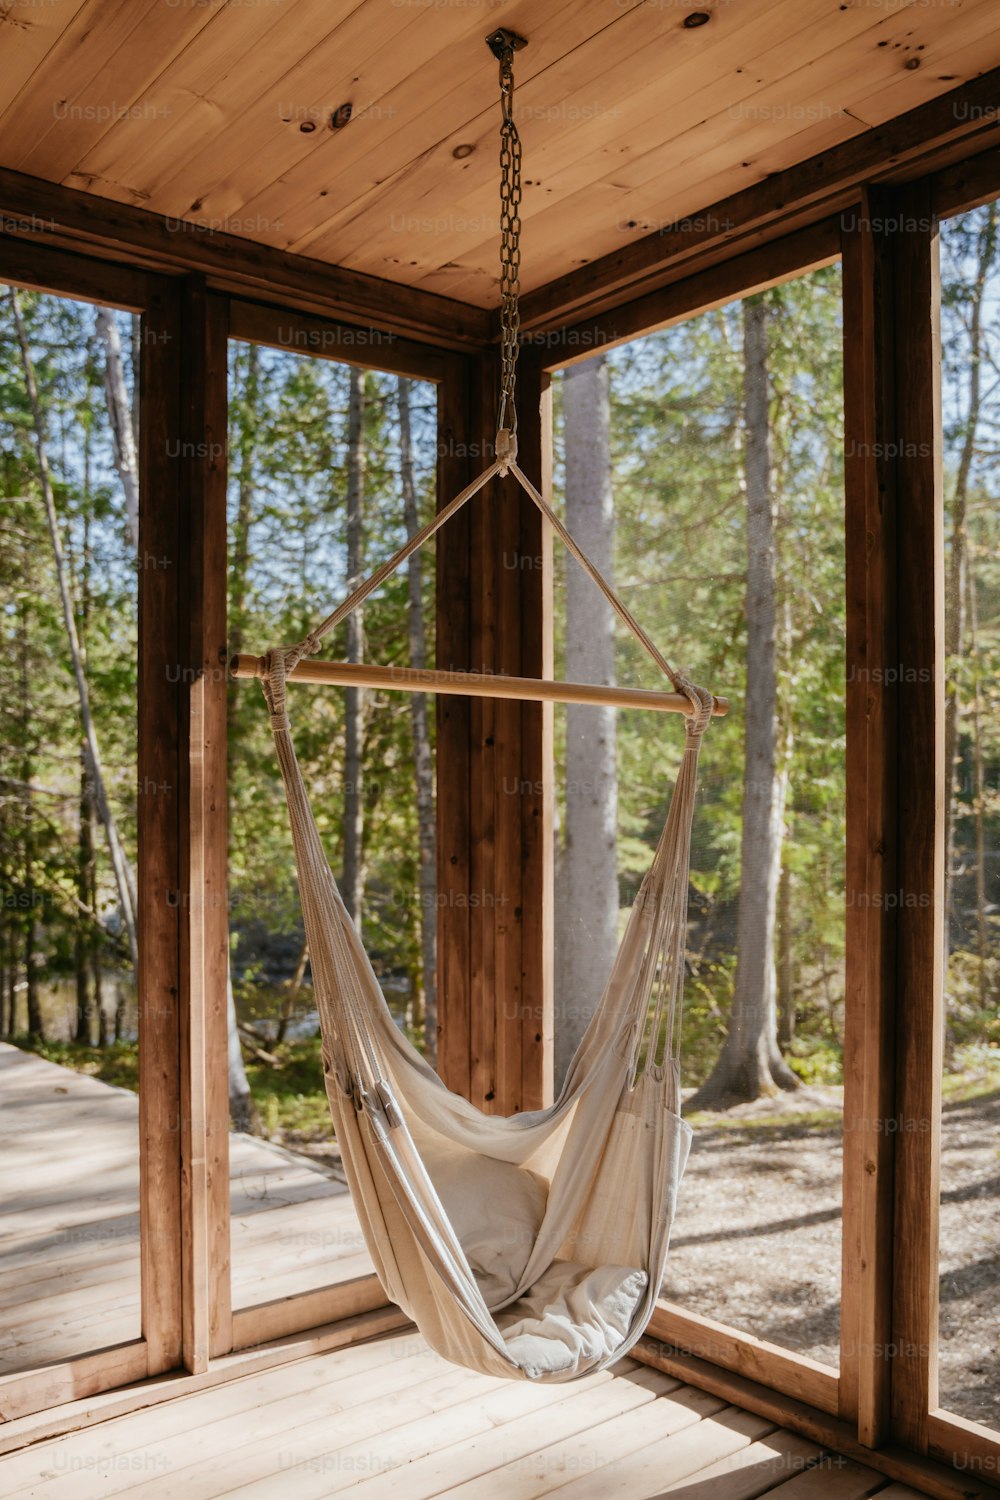 a hammock hanging from a wooden ceiling